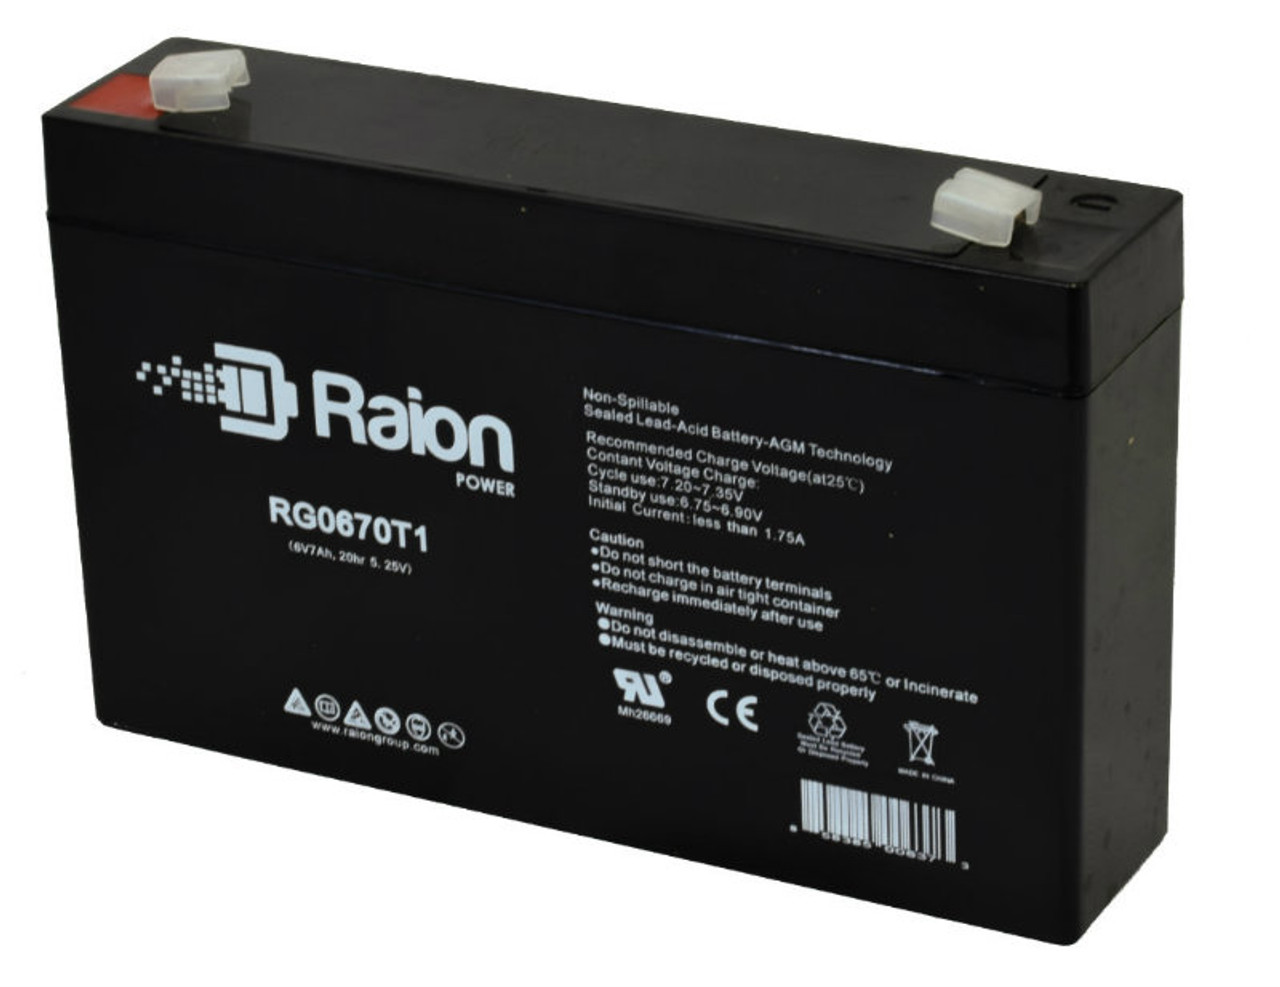 Raion Power 6V 7Ah Replacement Ride-On Toy Battery Cartridge for Wonderlanes 2721-12721 Loader